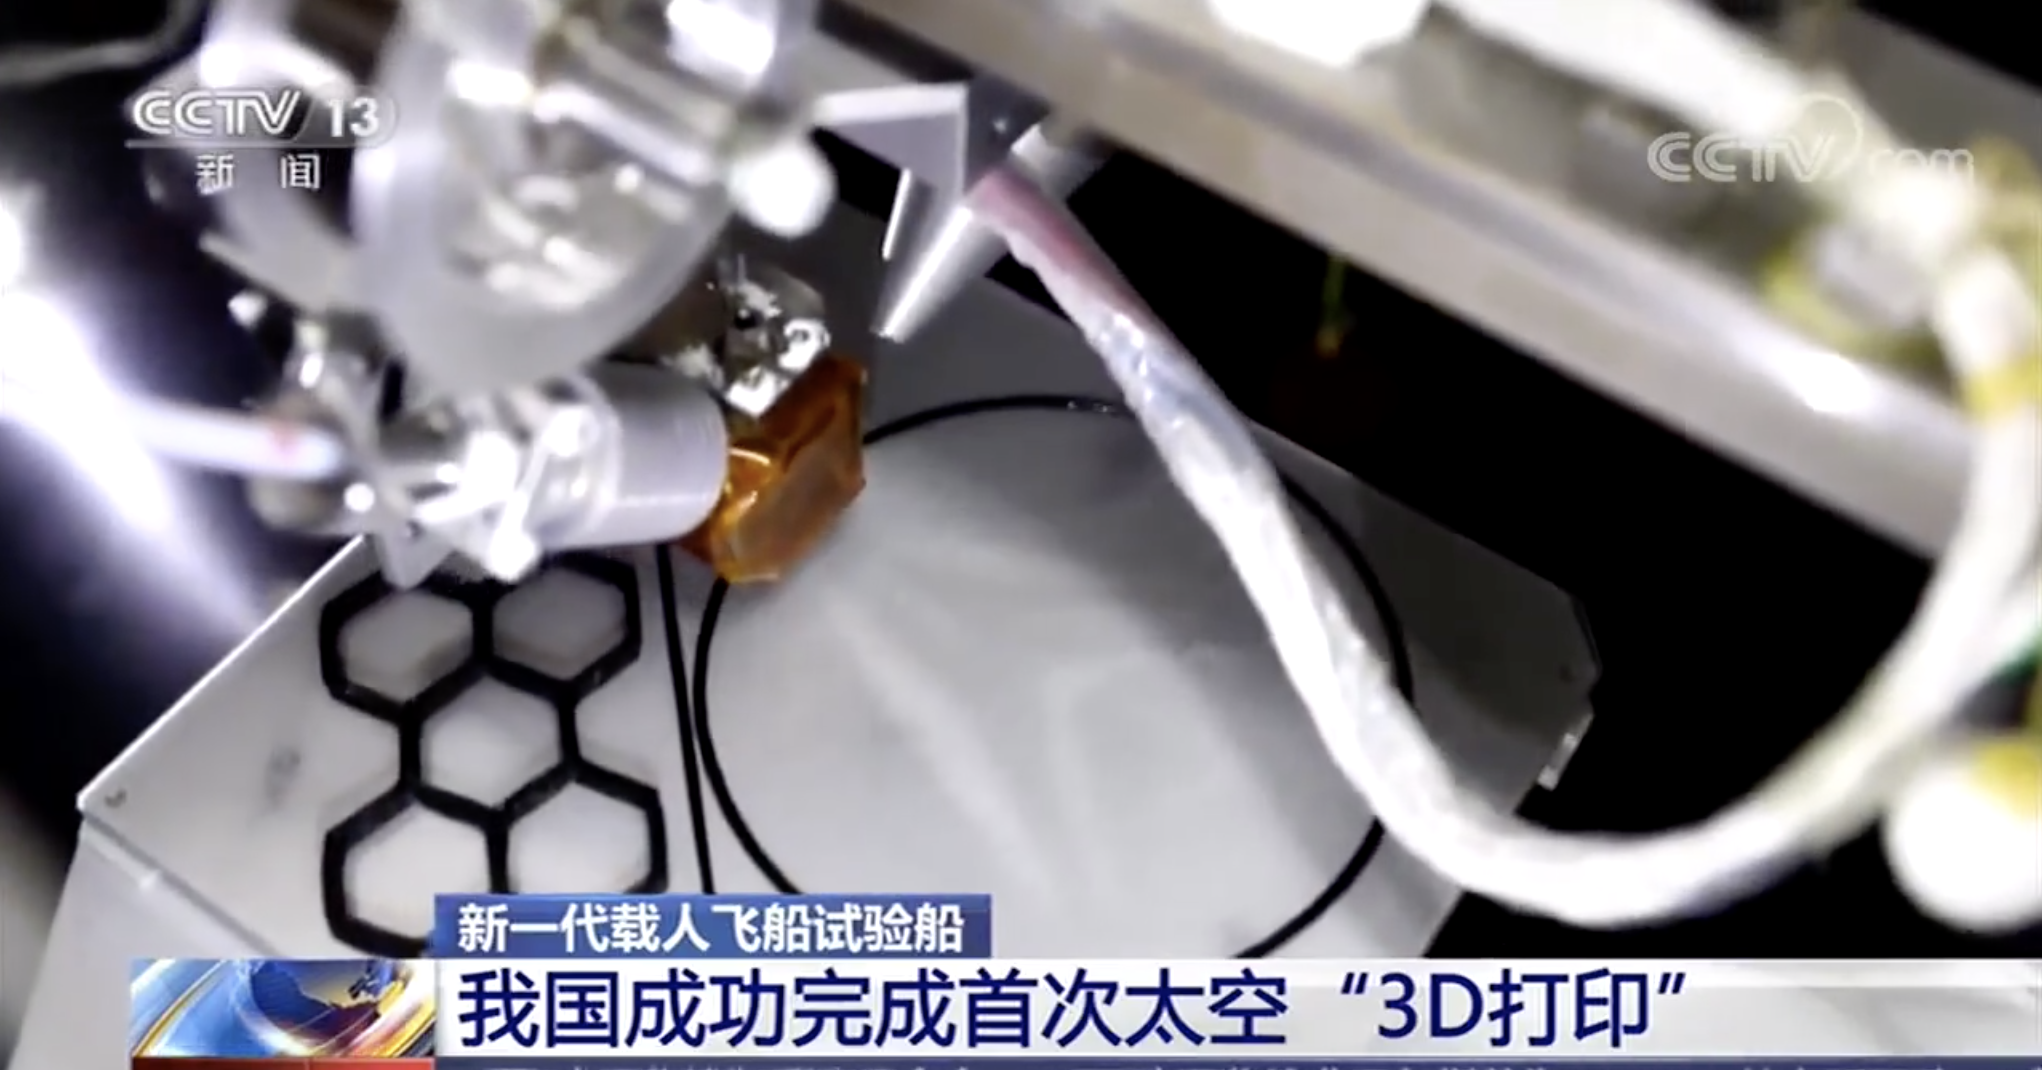 Researchers say two objects were printed: A beehive pattern and the logo of CASC, the main contractor of China’s space program. (Picture: CCTV)